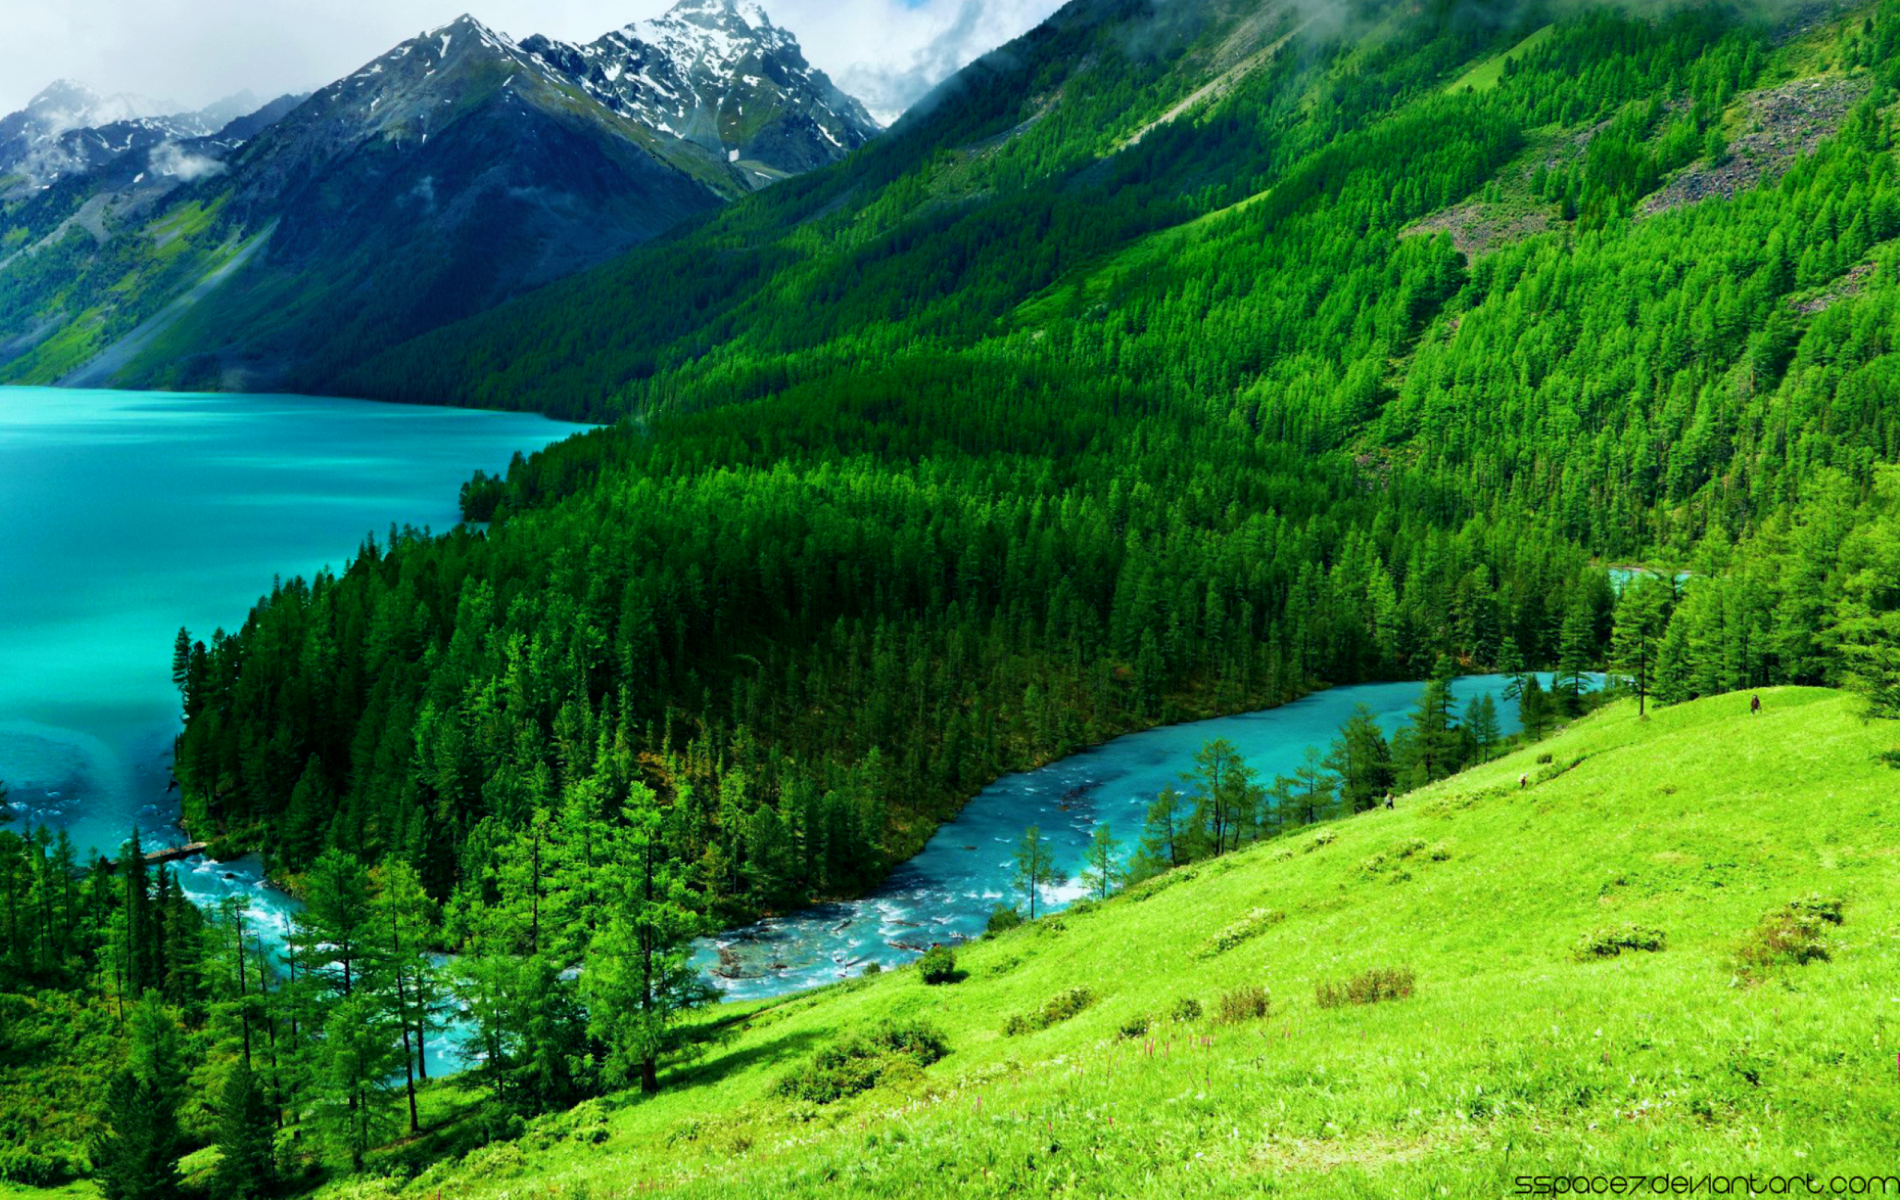 Free Download Nature Great Scenery Of Mountains And Rivers Hd Desktop Wallpaper 1900x1200 For Your Desktop Mobile Tablet Explore 64 Mountain Scenery Wallpaper Scenery Wallpaper For Computer Scenic Wallpaper Murals